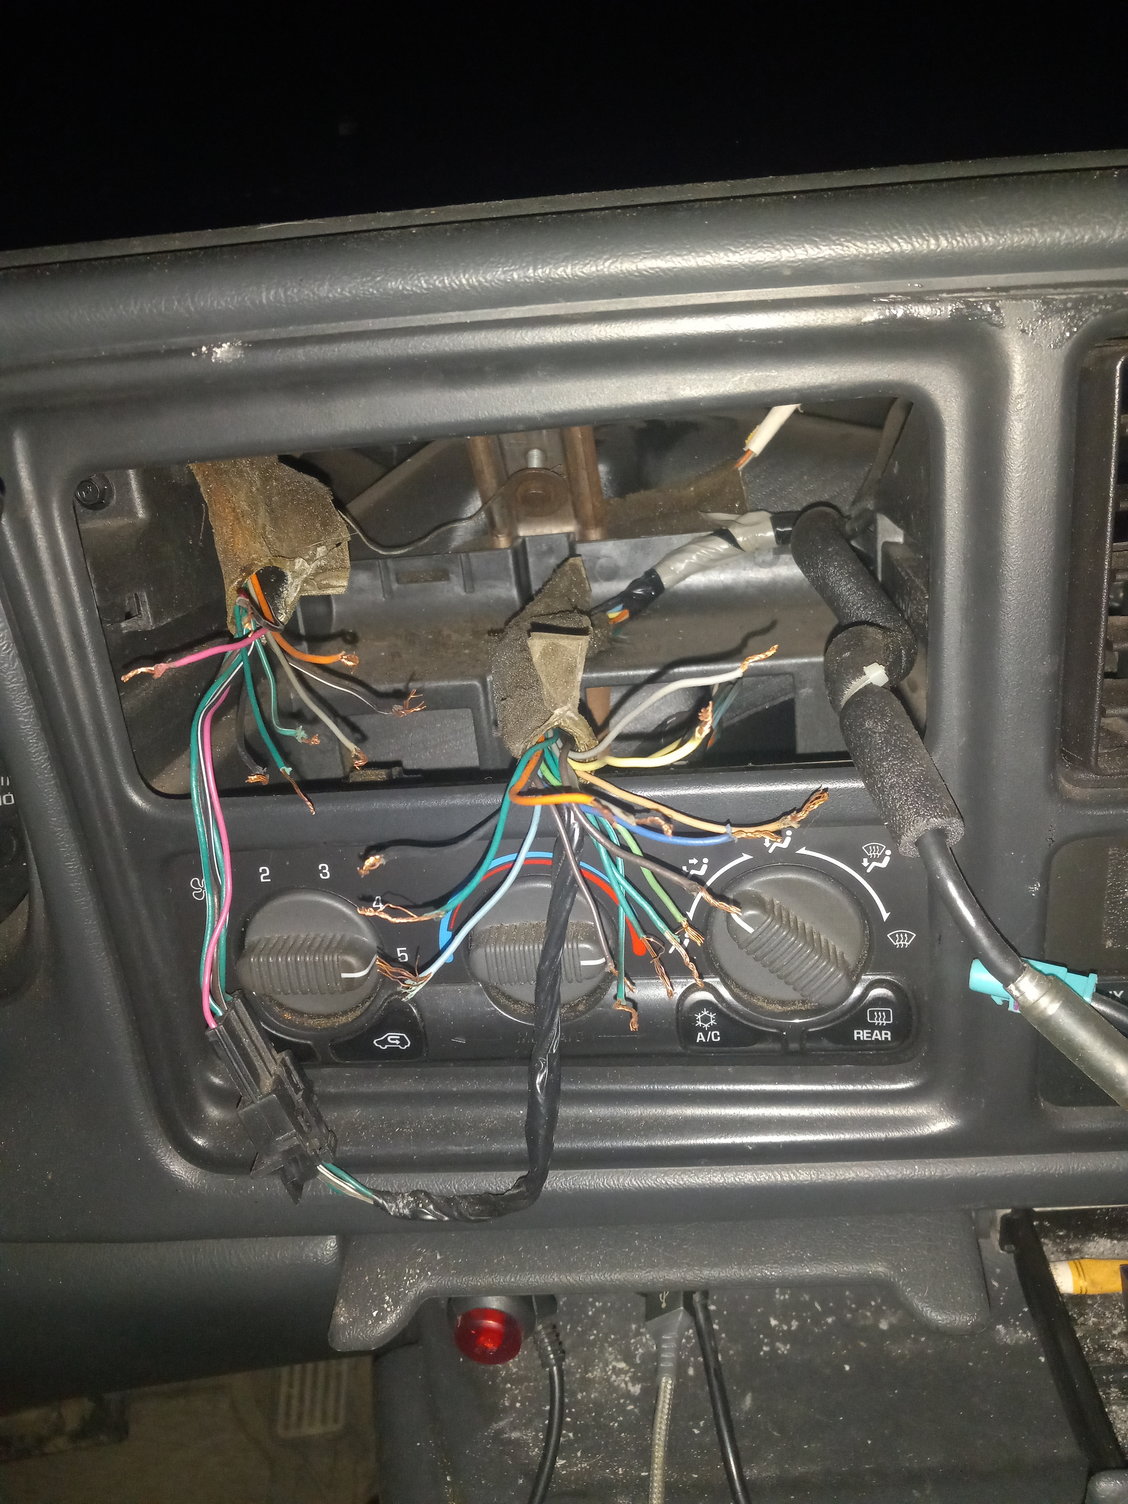 stereo wiring diagram for 2002 silverado 2500 extended cab??? - Chevrolet  Forum - Chevy Enthusiasts Forums  Silverado Radio Wiring Diagram    ChevroletForum